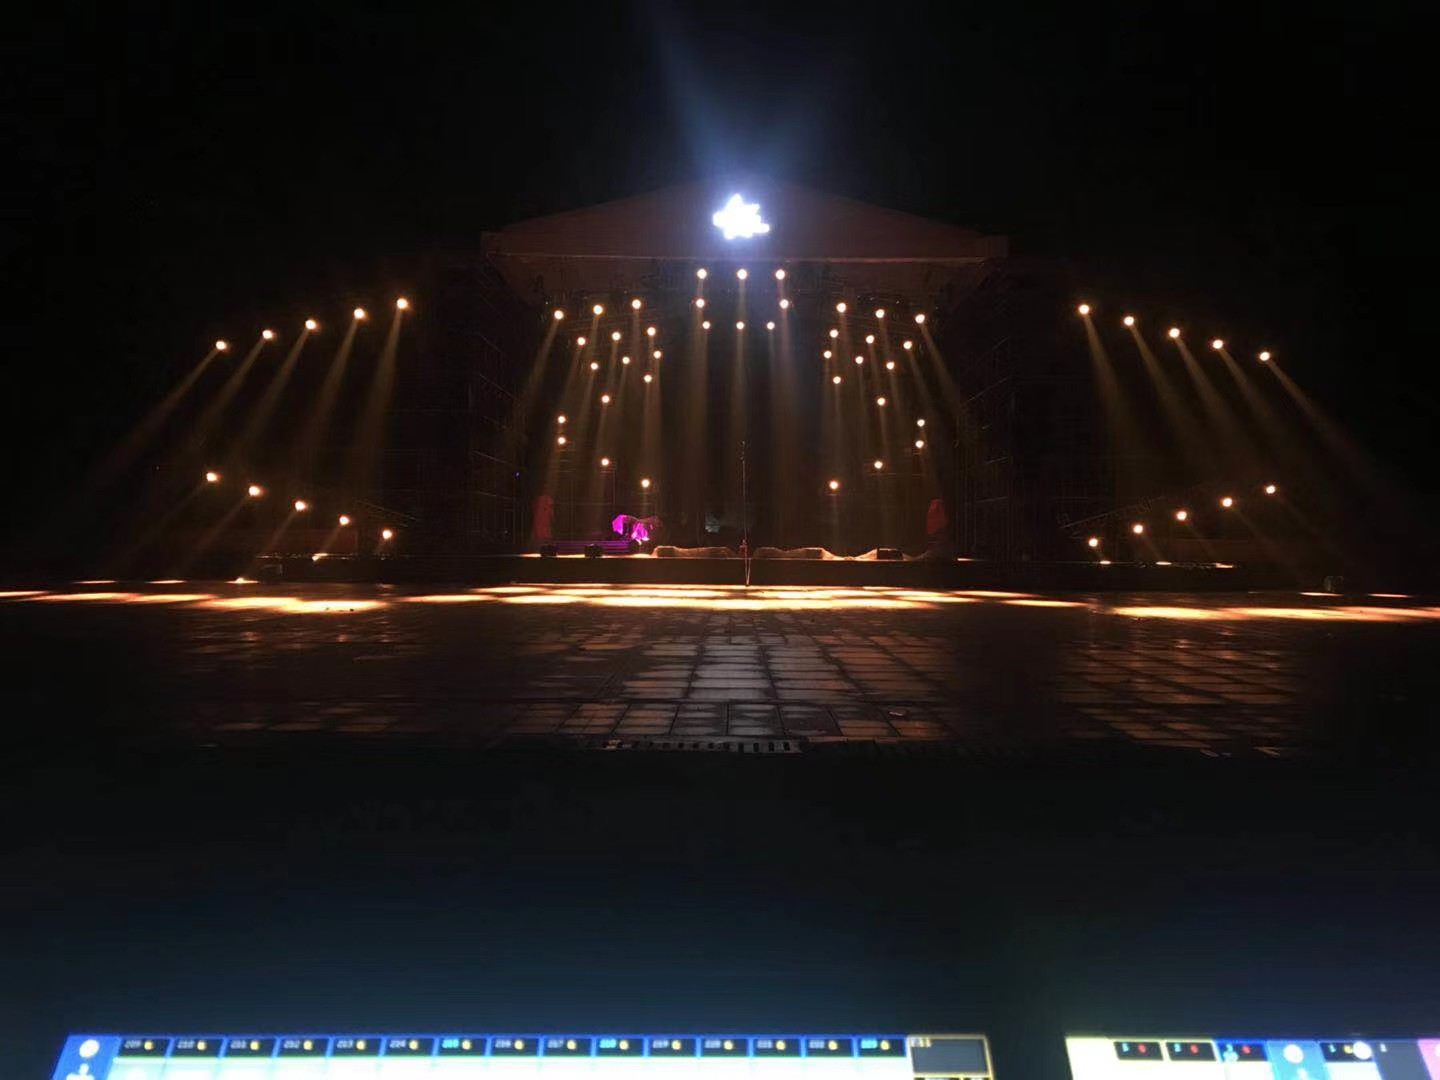 K15 LED moving head light project in China Jiangsu Province in the year of 2015